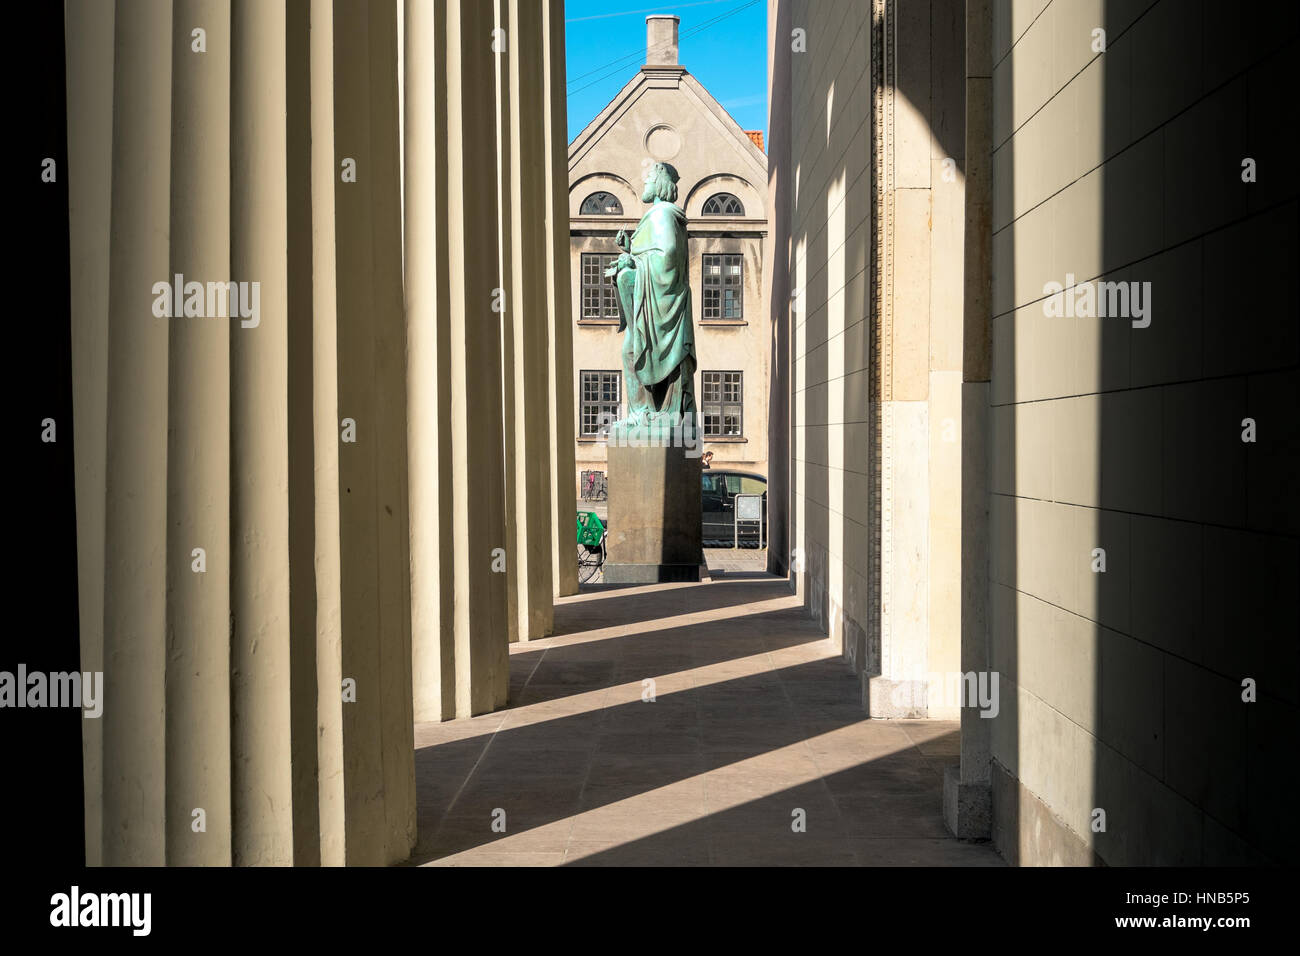 Statue of King David by the Copenhagen Cathedral Stock Photo